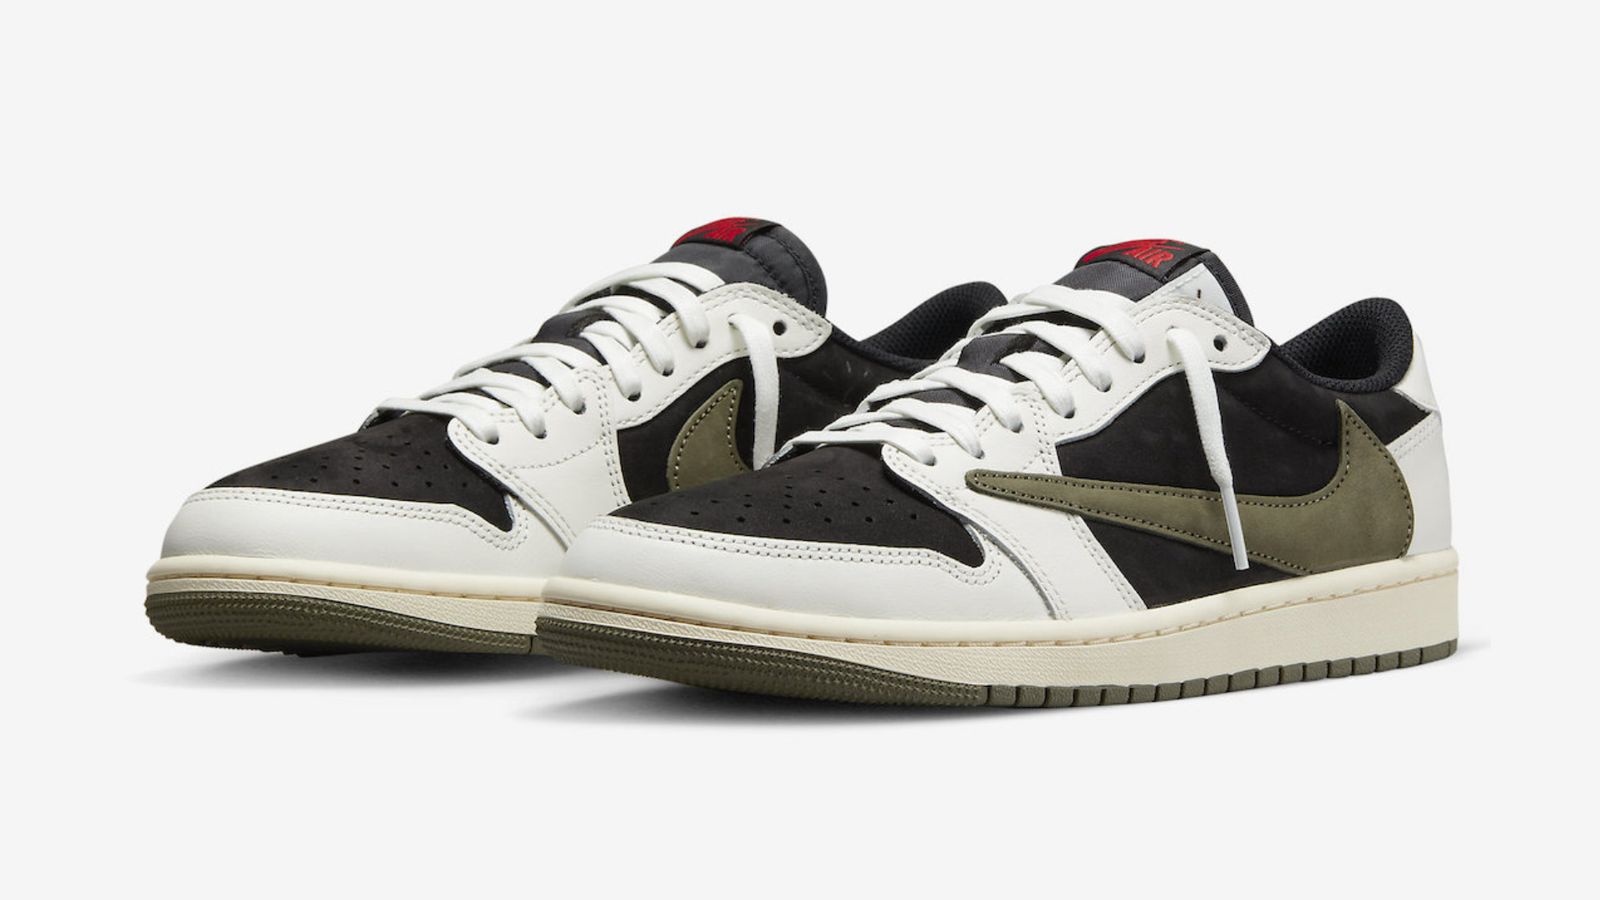 Travis Scott x Air Jordan 1 Low "Olive" product image of a sail, black, and olive low-top featuring red accents.